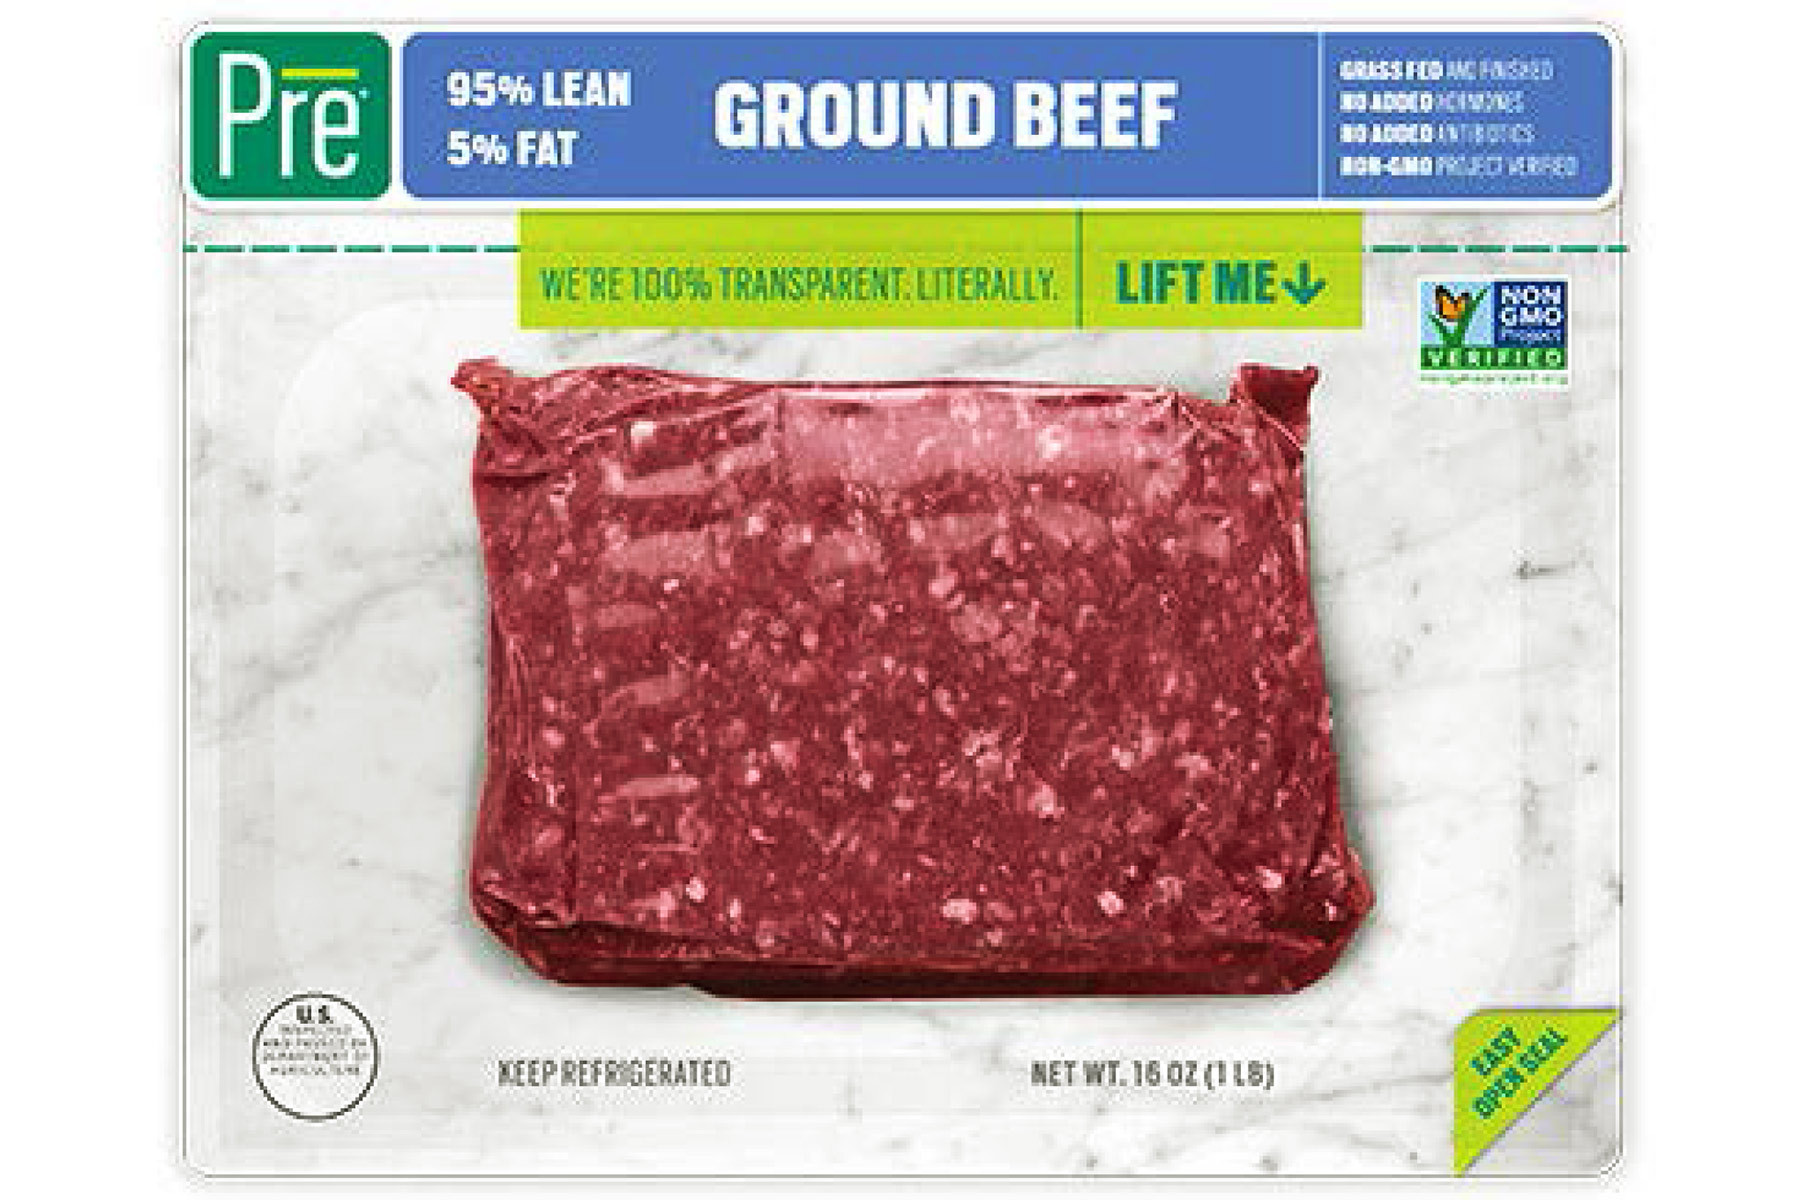 Recalled Ground Beef
 Recall Ground Beef May Contain Plastic Bits